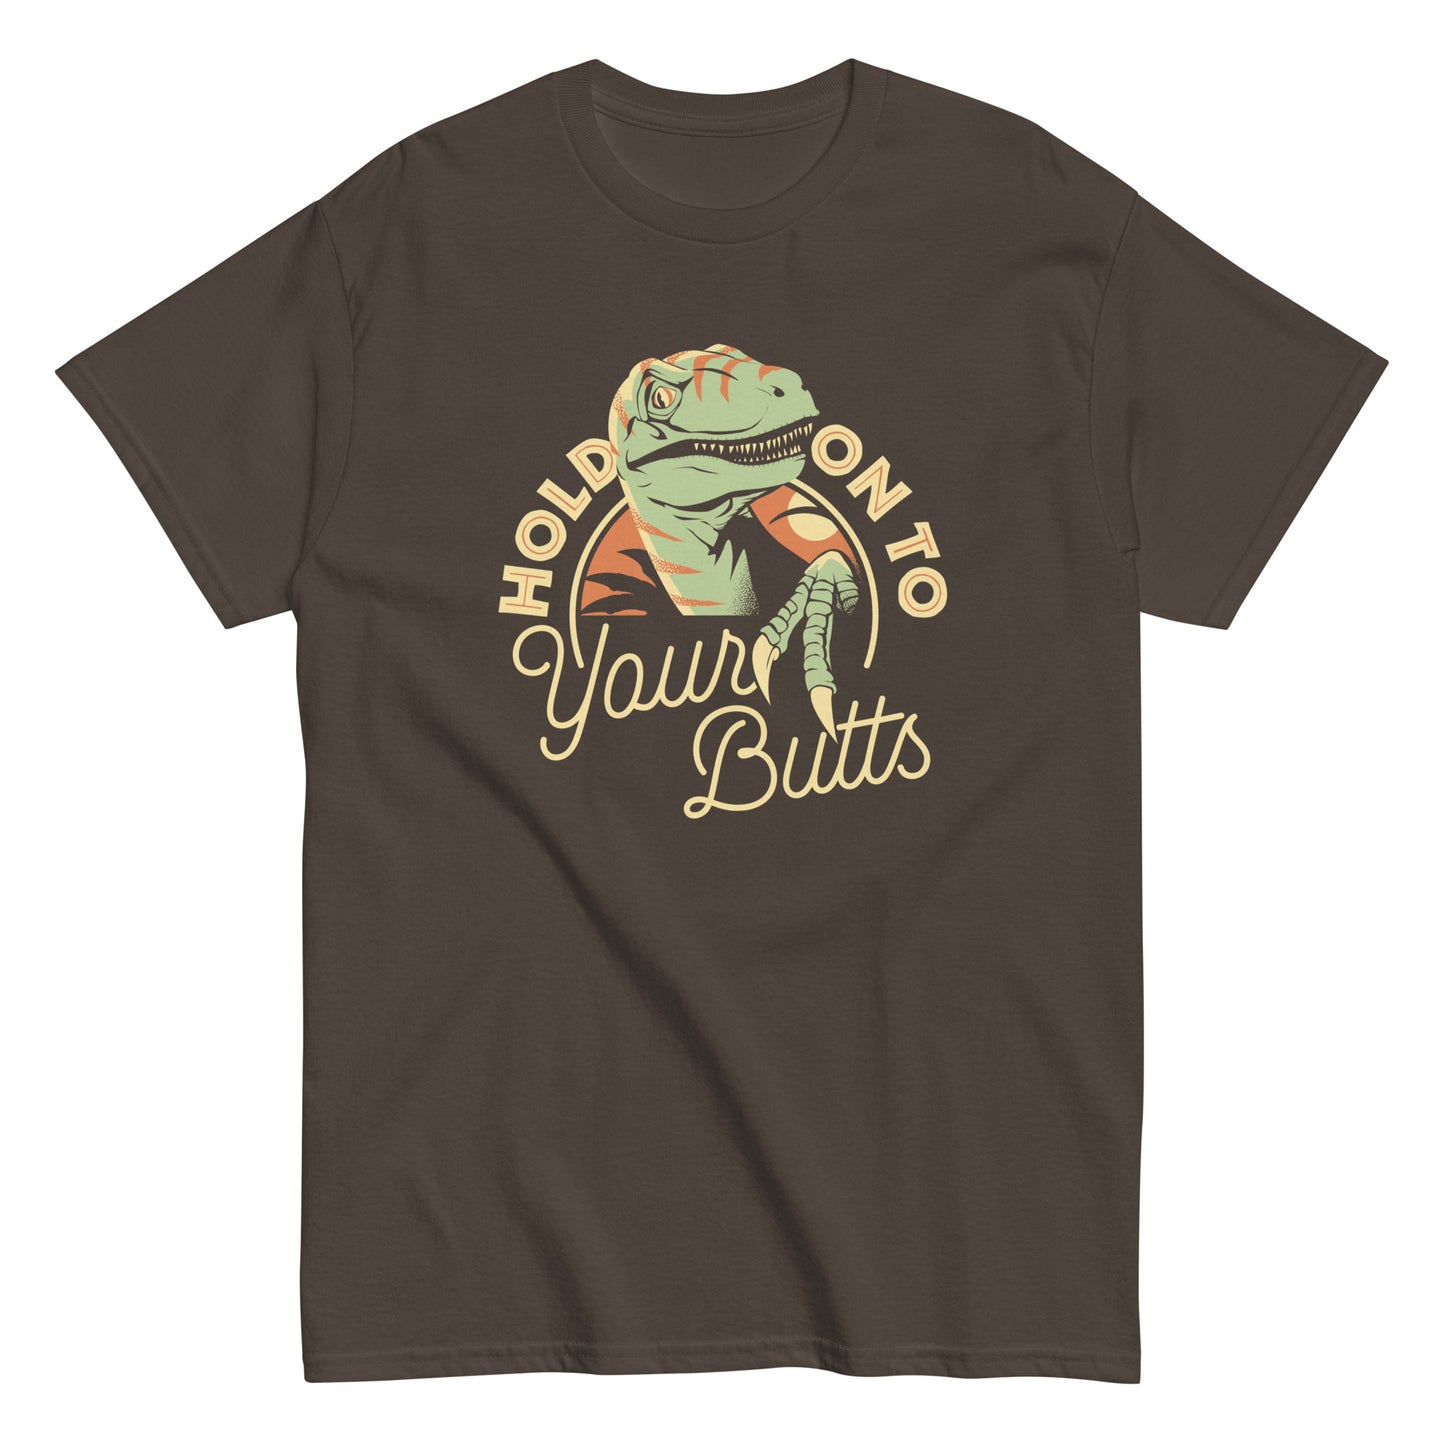 Hold On To Your Butts Men's Classic Tee